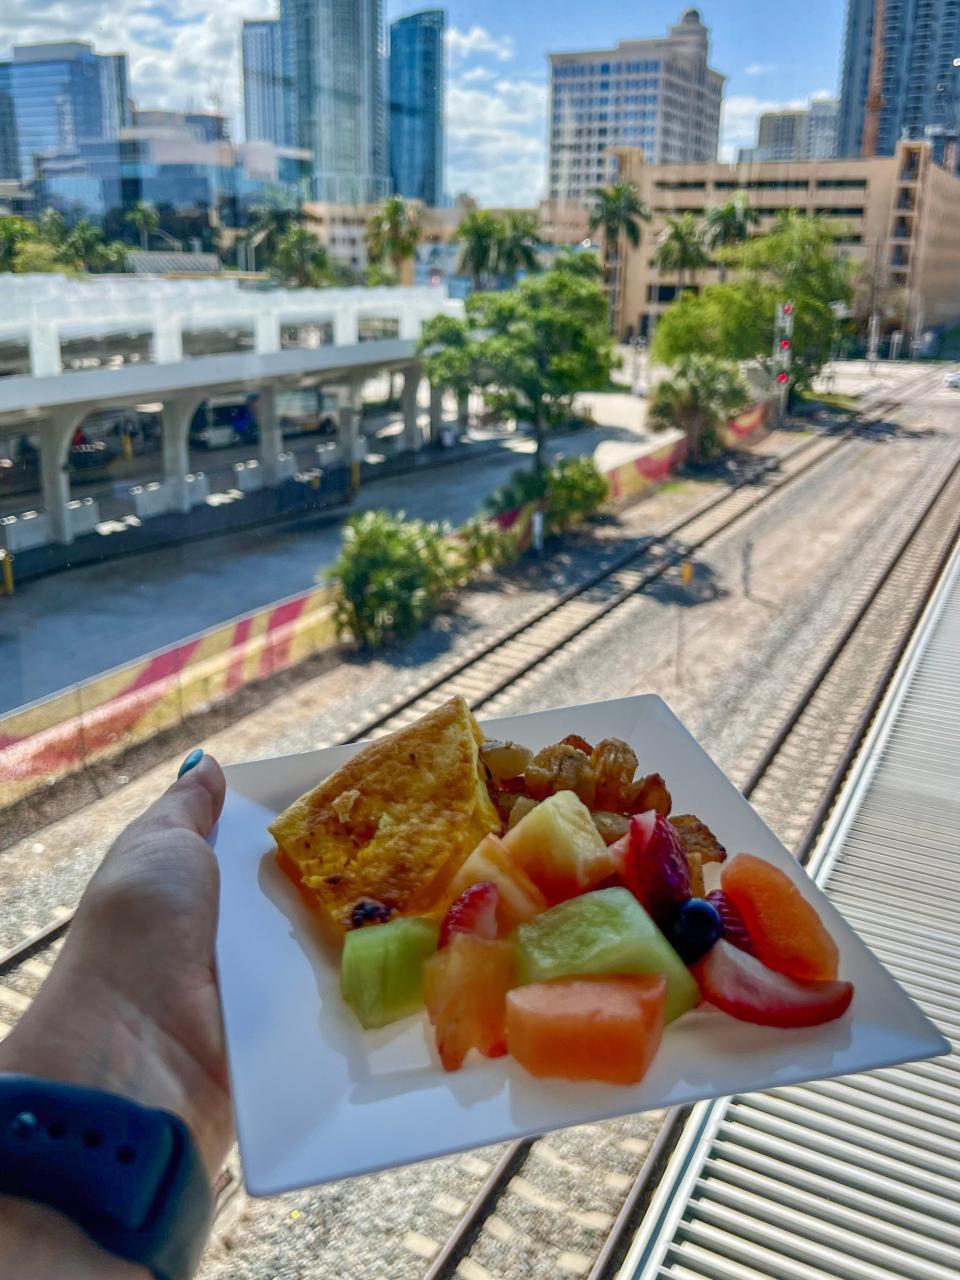 A hand holds a small plate with breakfast food is held up in front of a window overlooking the Brightline train tracks.